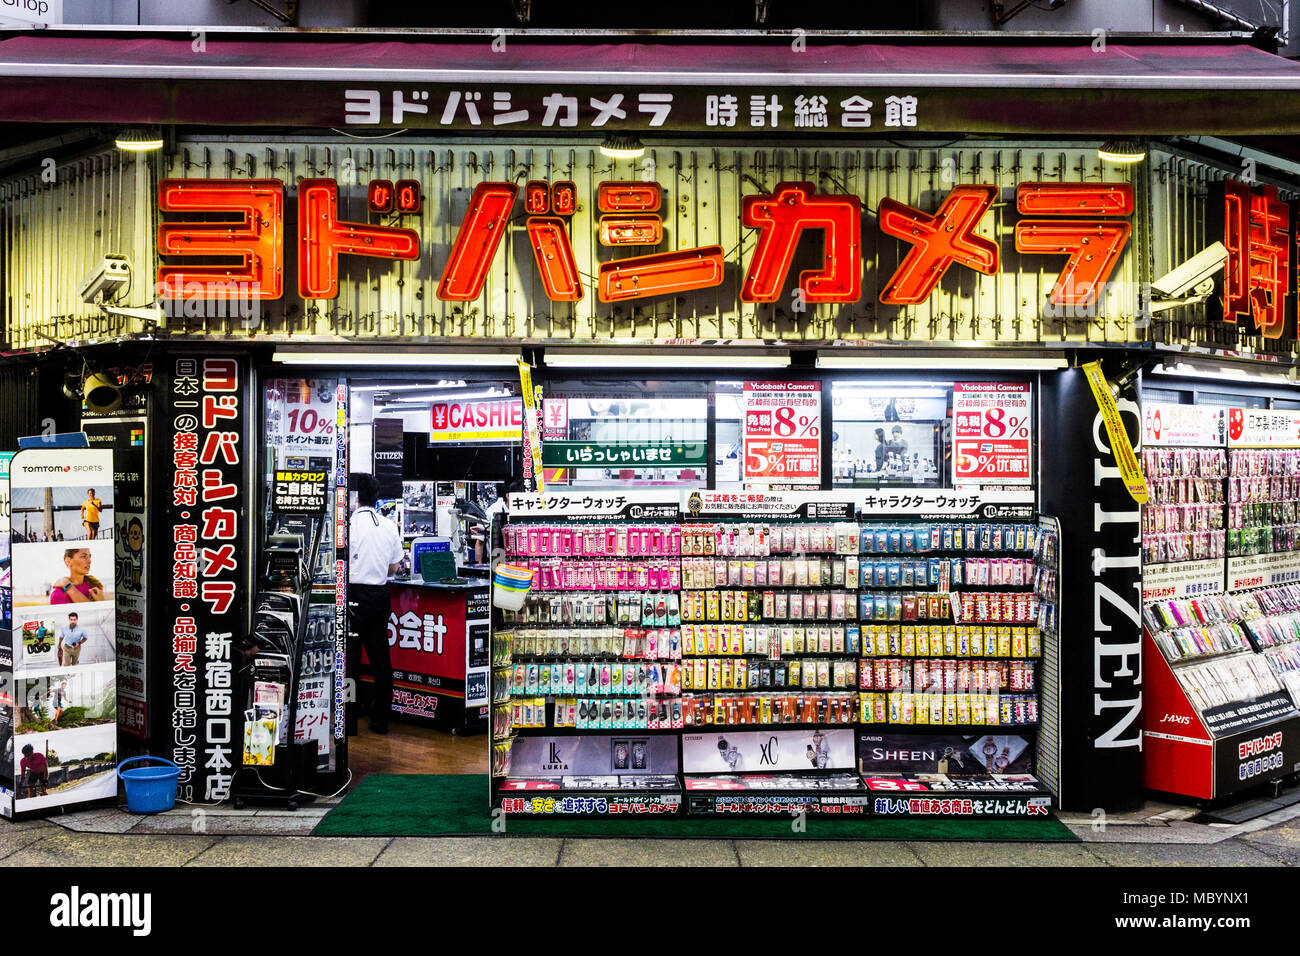 Tokyo, Japan. Yodobashi Camera store, a major Japanese retail chain specializing in electronics, PCs, cameras and photographic equipment Stock Photo